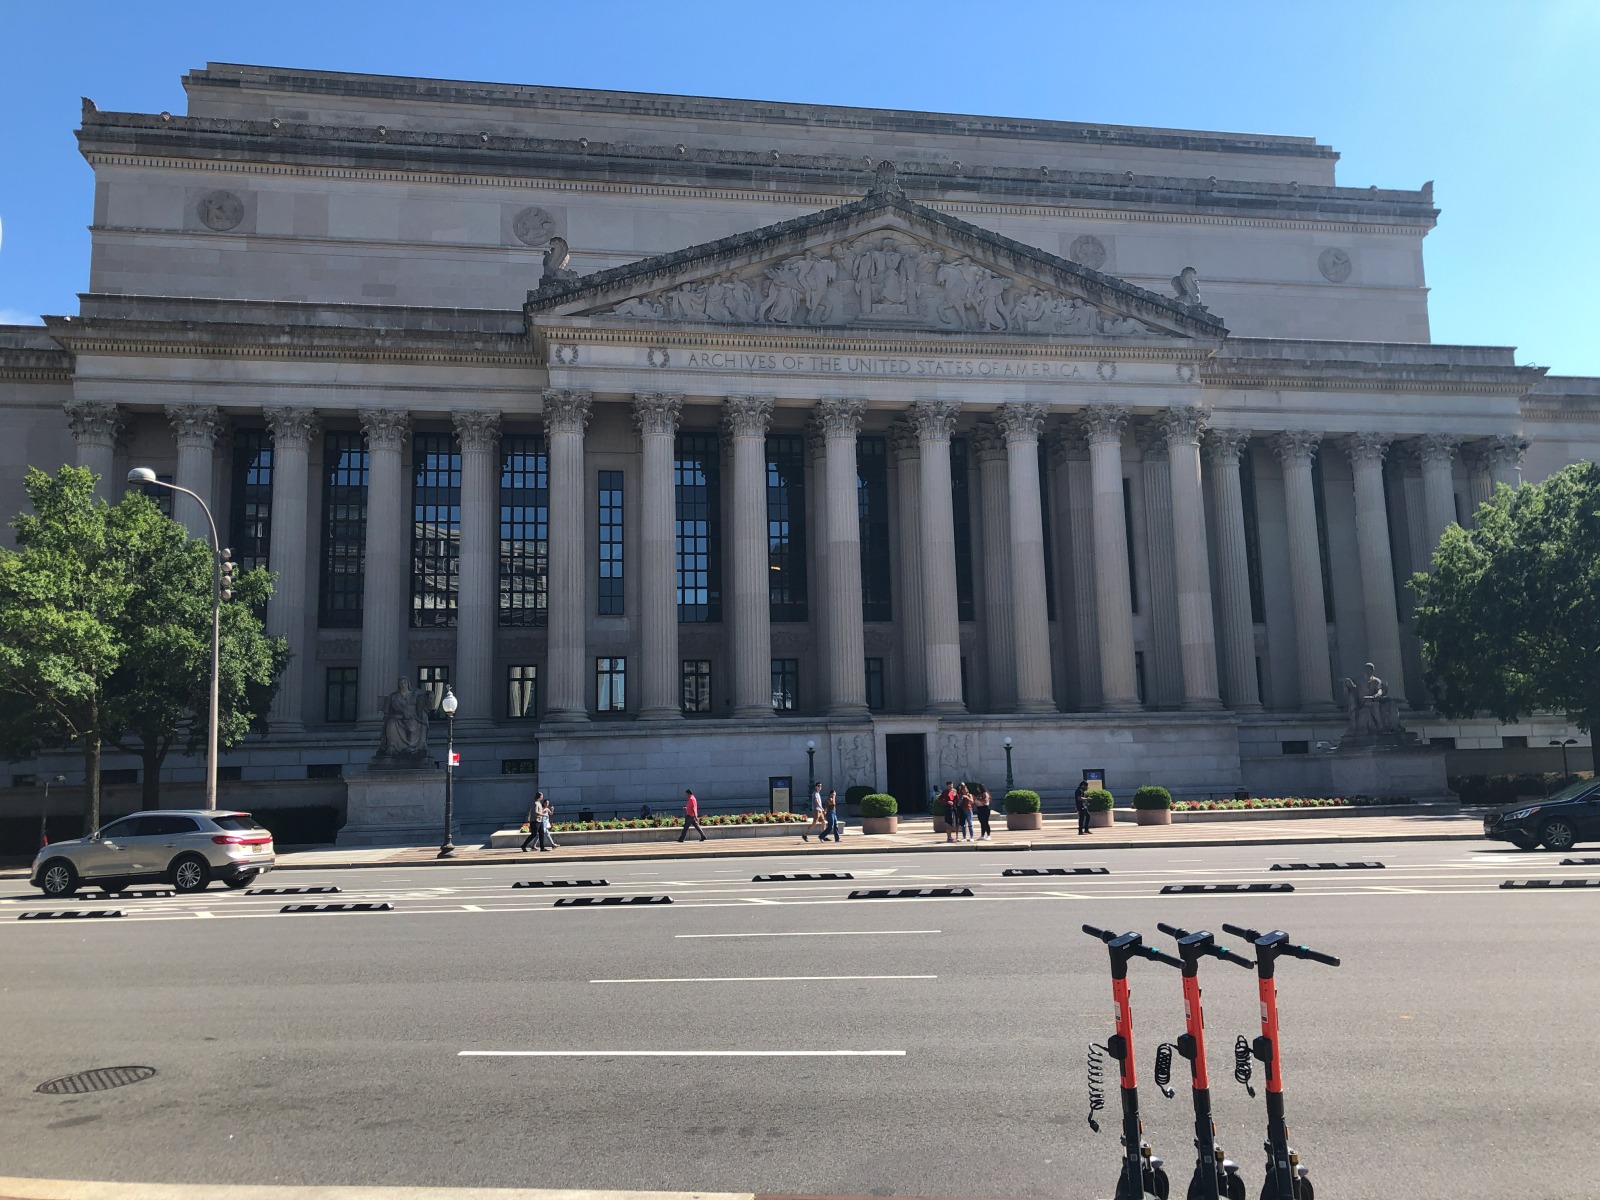 Day 2 – National Archives and Navy Memorial